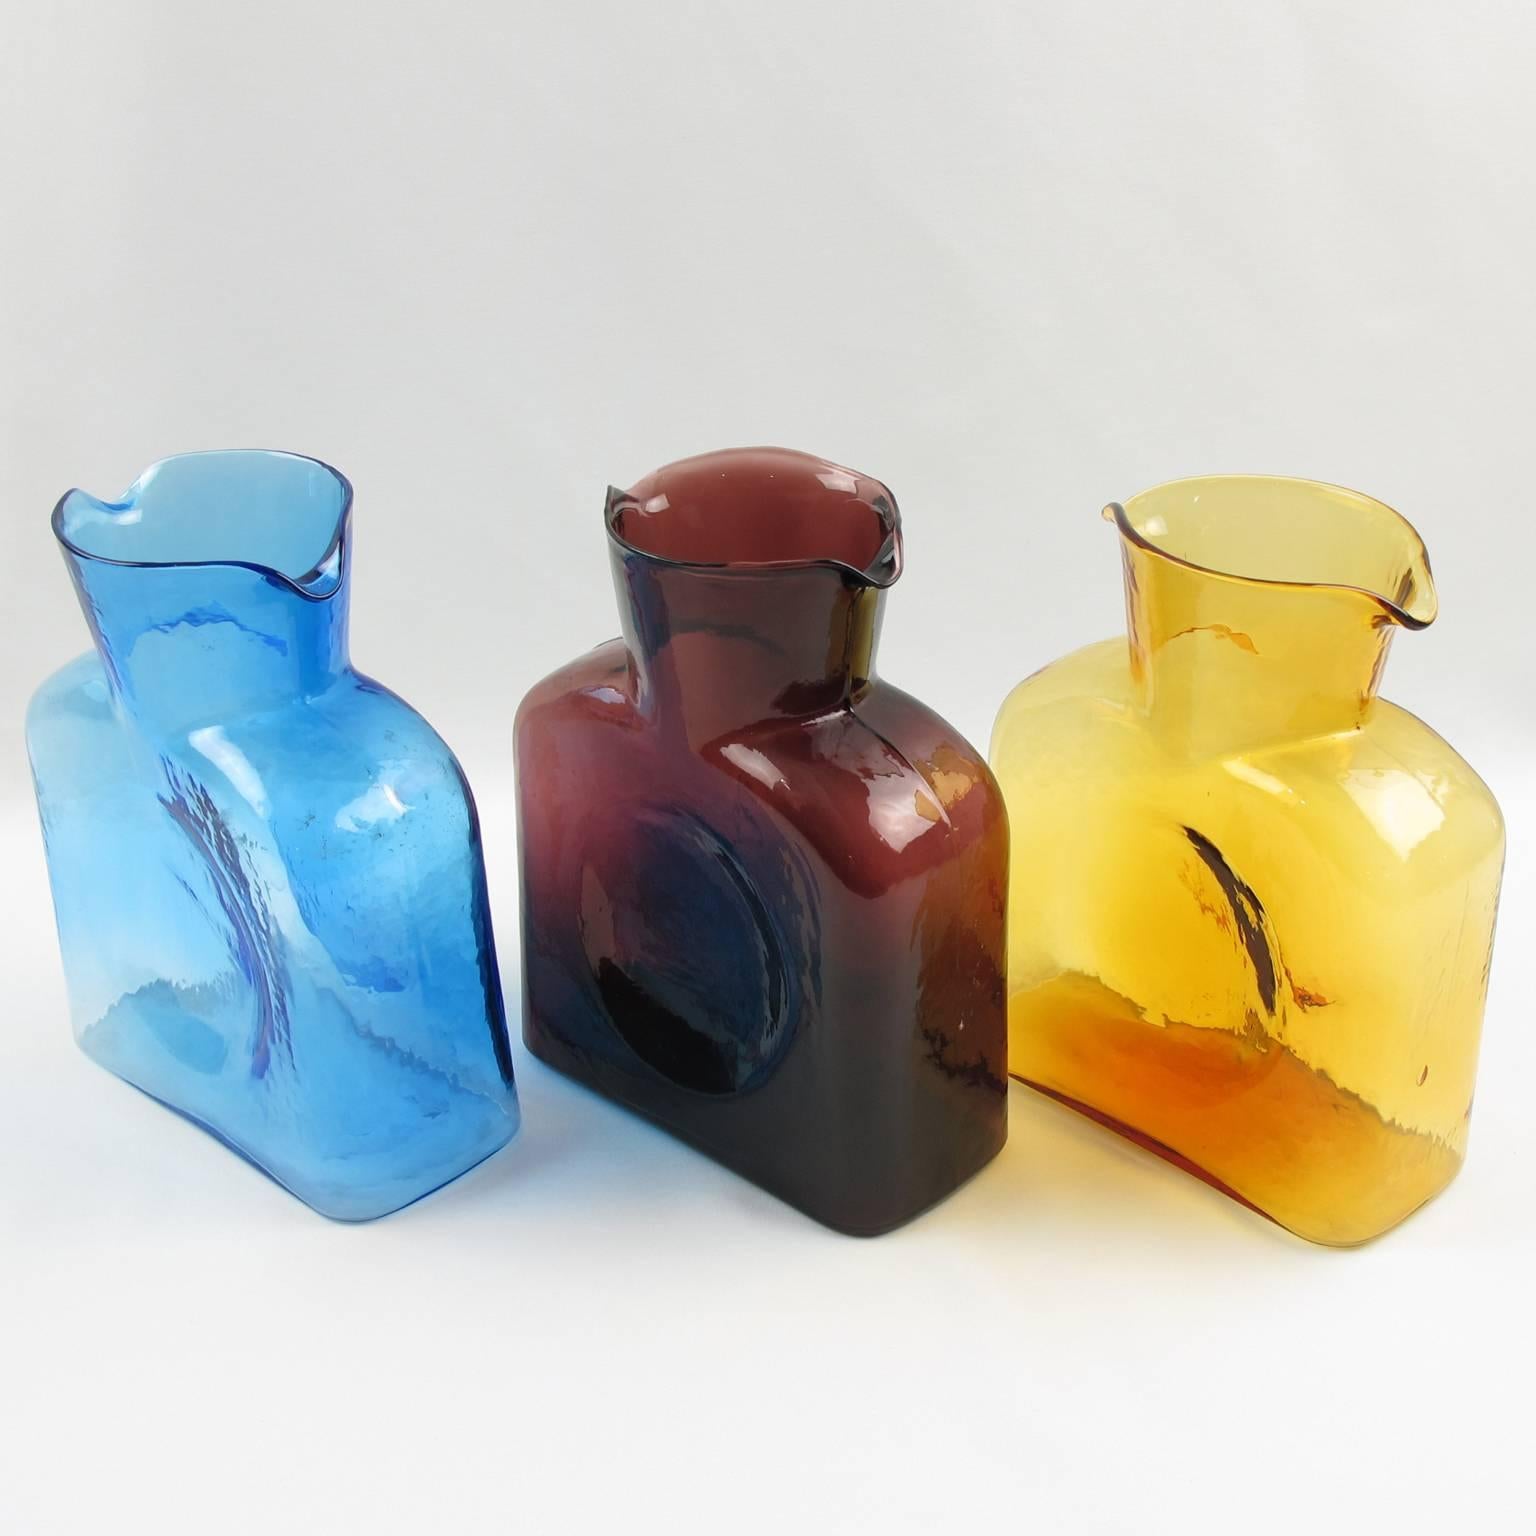 Mid-Century Modern Mid-Century Set of Three Double Spouted Pitchers Decanters by Blenko Glass